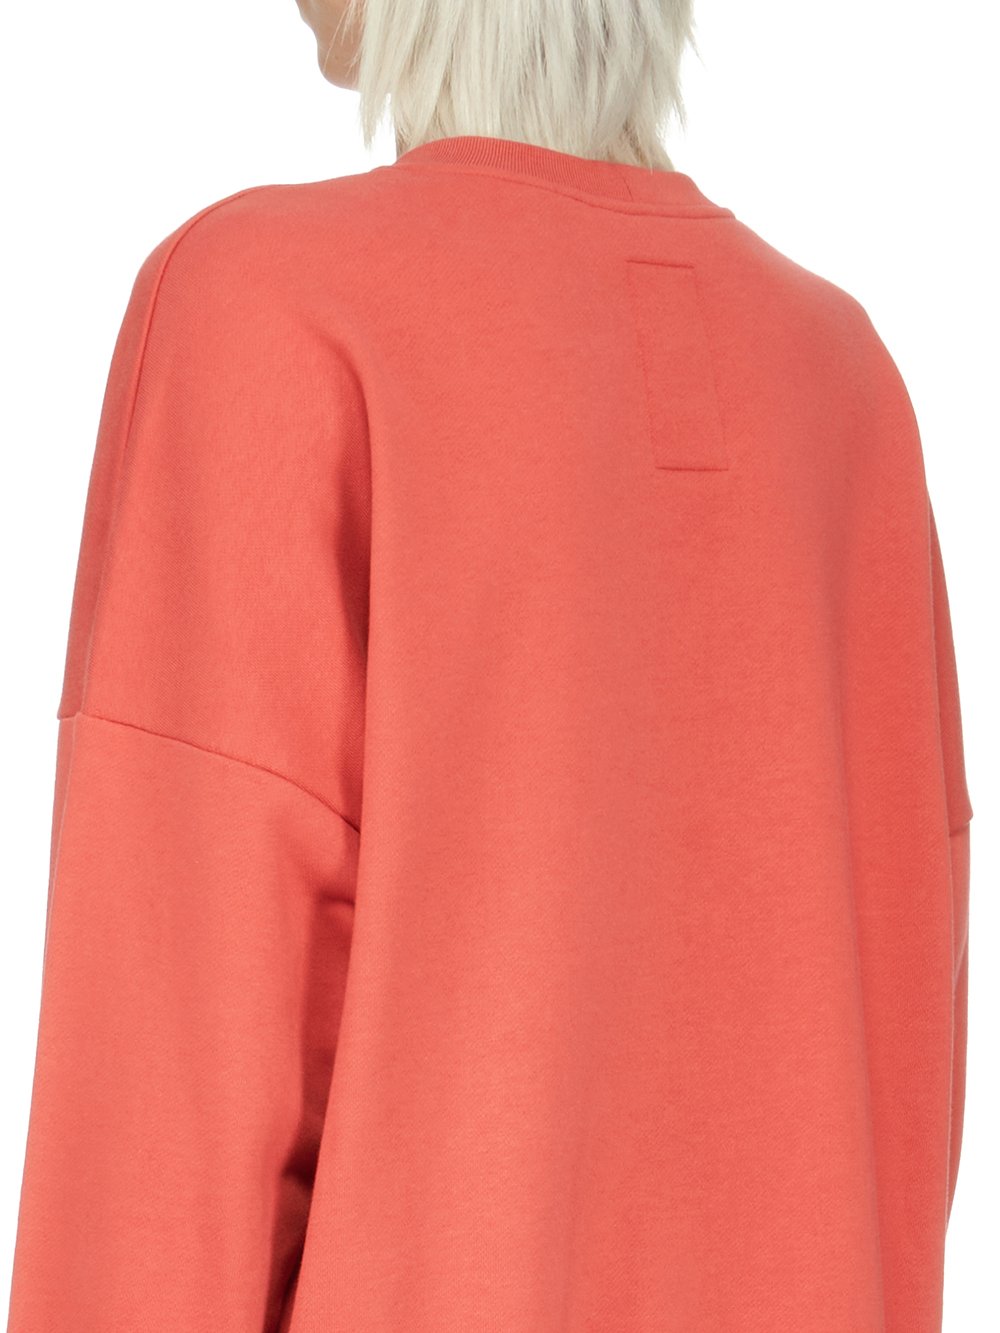 CHAMPION X RICK OWENS PULLOVER SWEAT IN CARNELIAN RED COMPACT COTTON FELPA